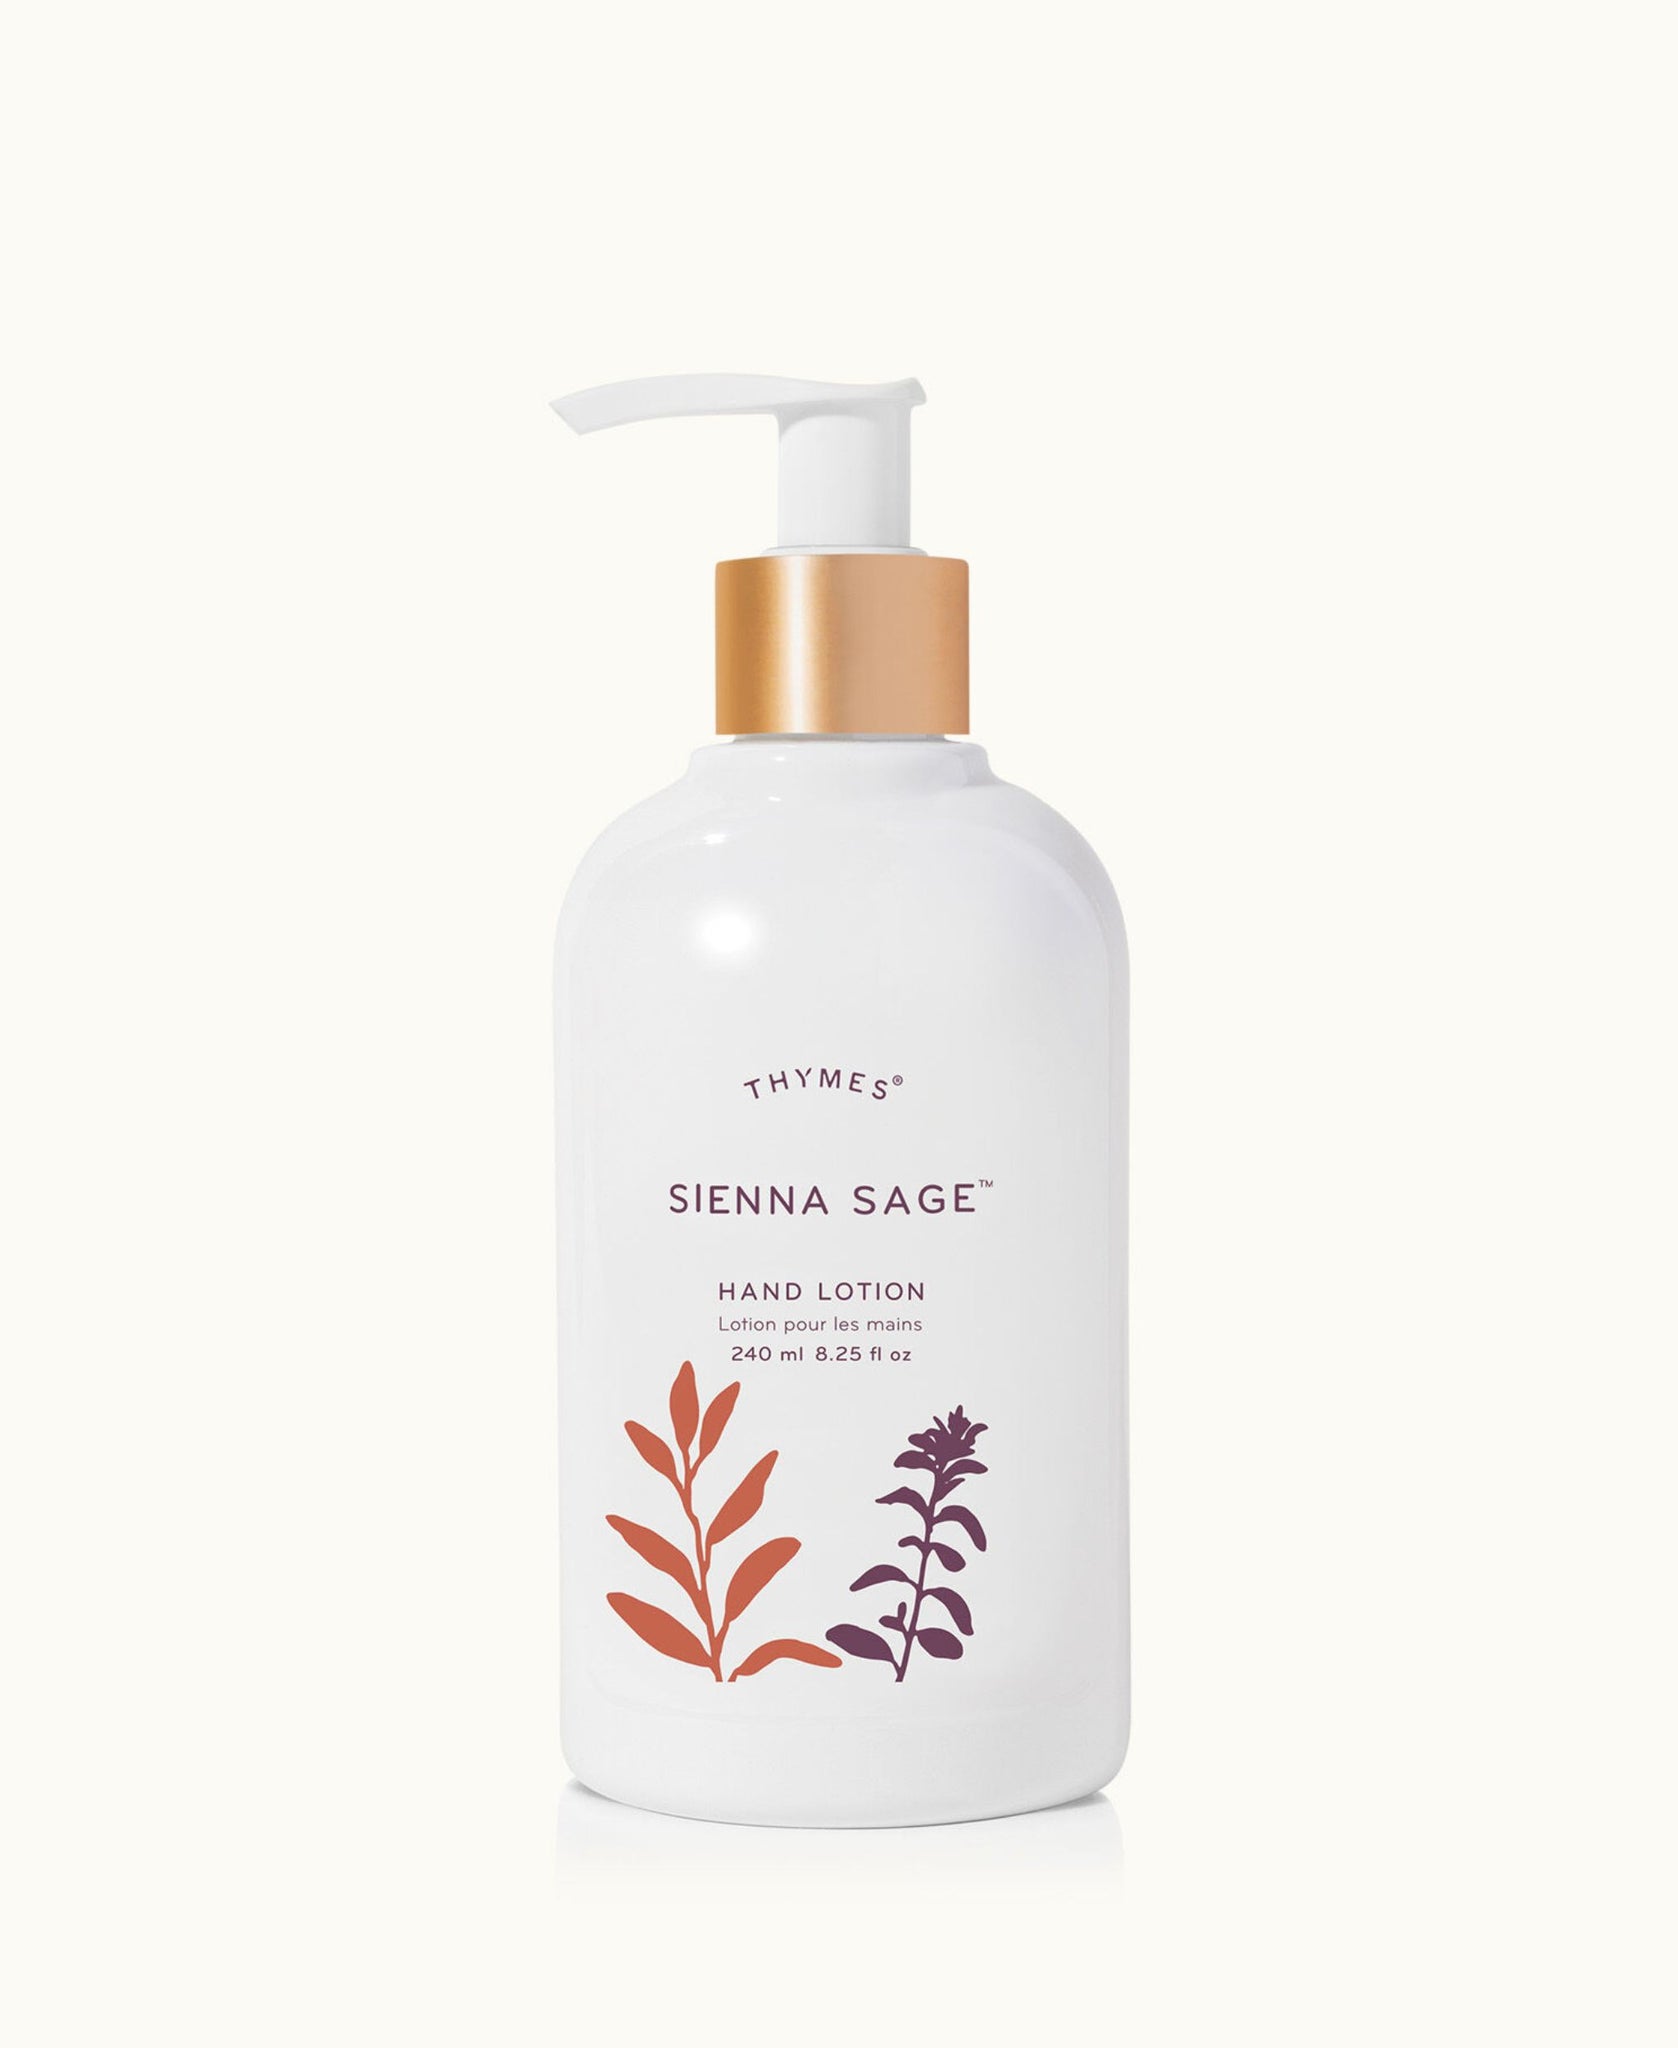 Thymes Sienna Sage Hand Lotion